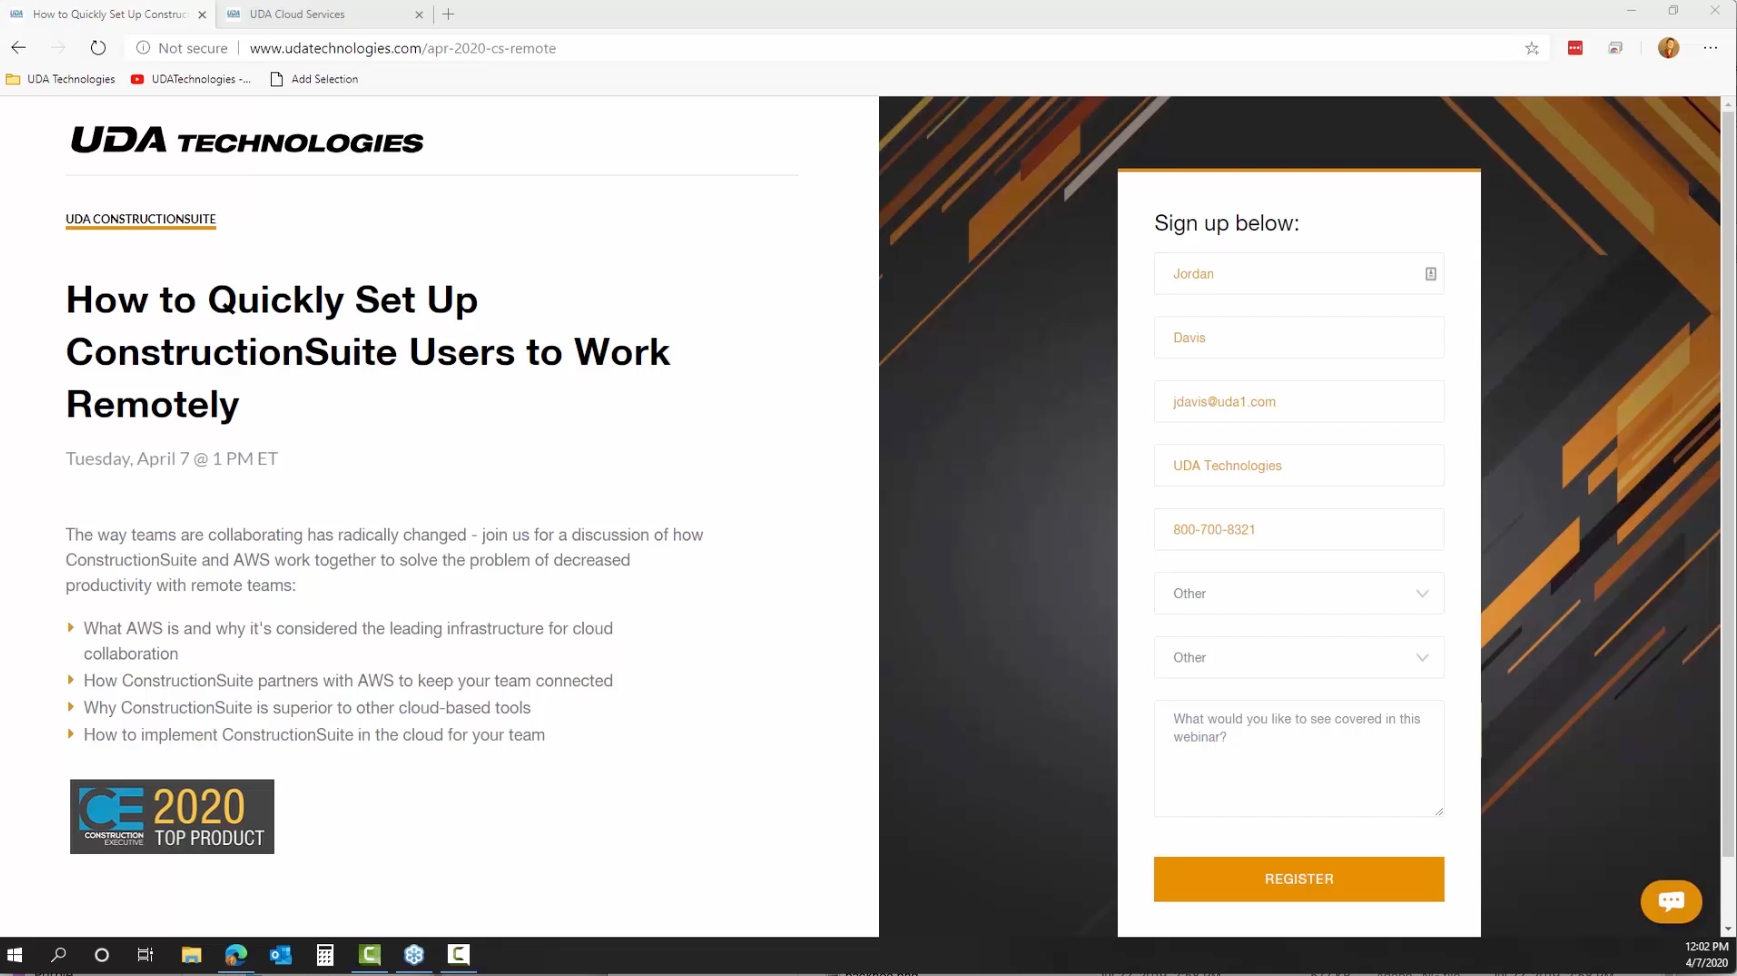 How to Quickly Set Up ConstructionSuite Users to Work Remotely